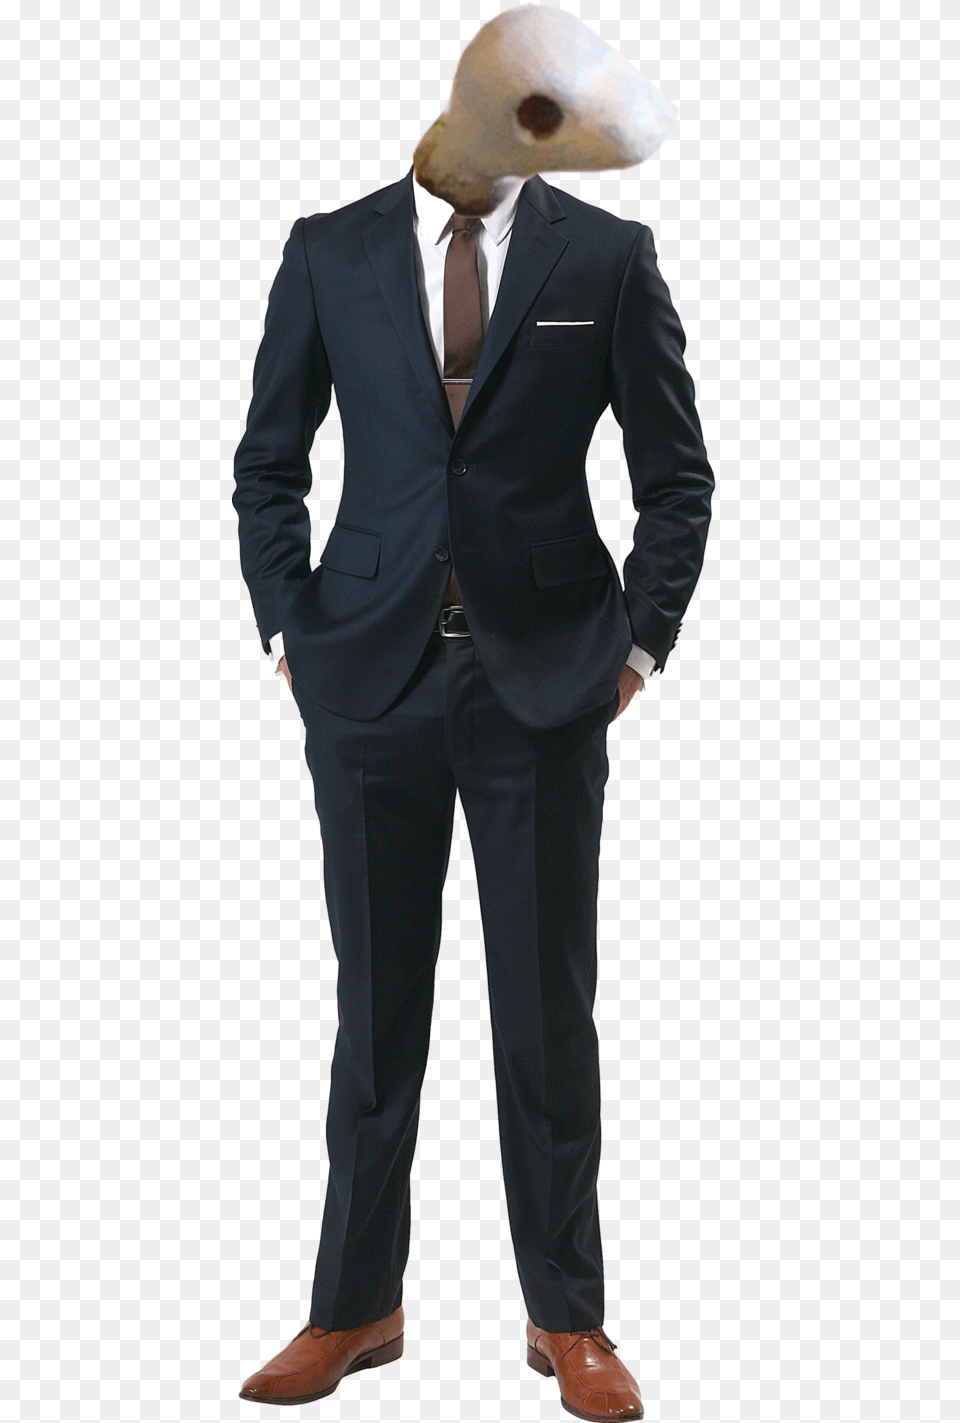 Photoshop Garbage 4 Skeleturtle The Businessman By Full Body Businessman, Tuxedo, Suit, Clothing, Formal Wear Free Png